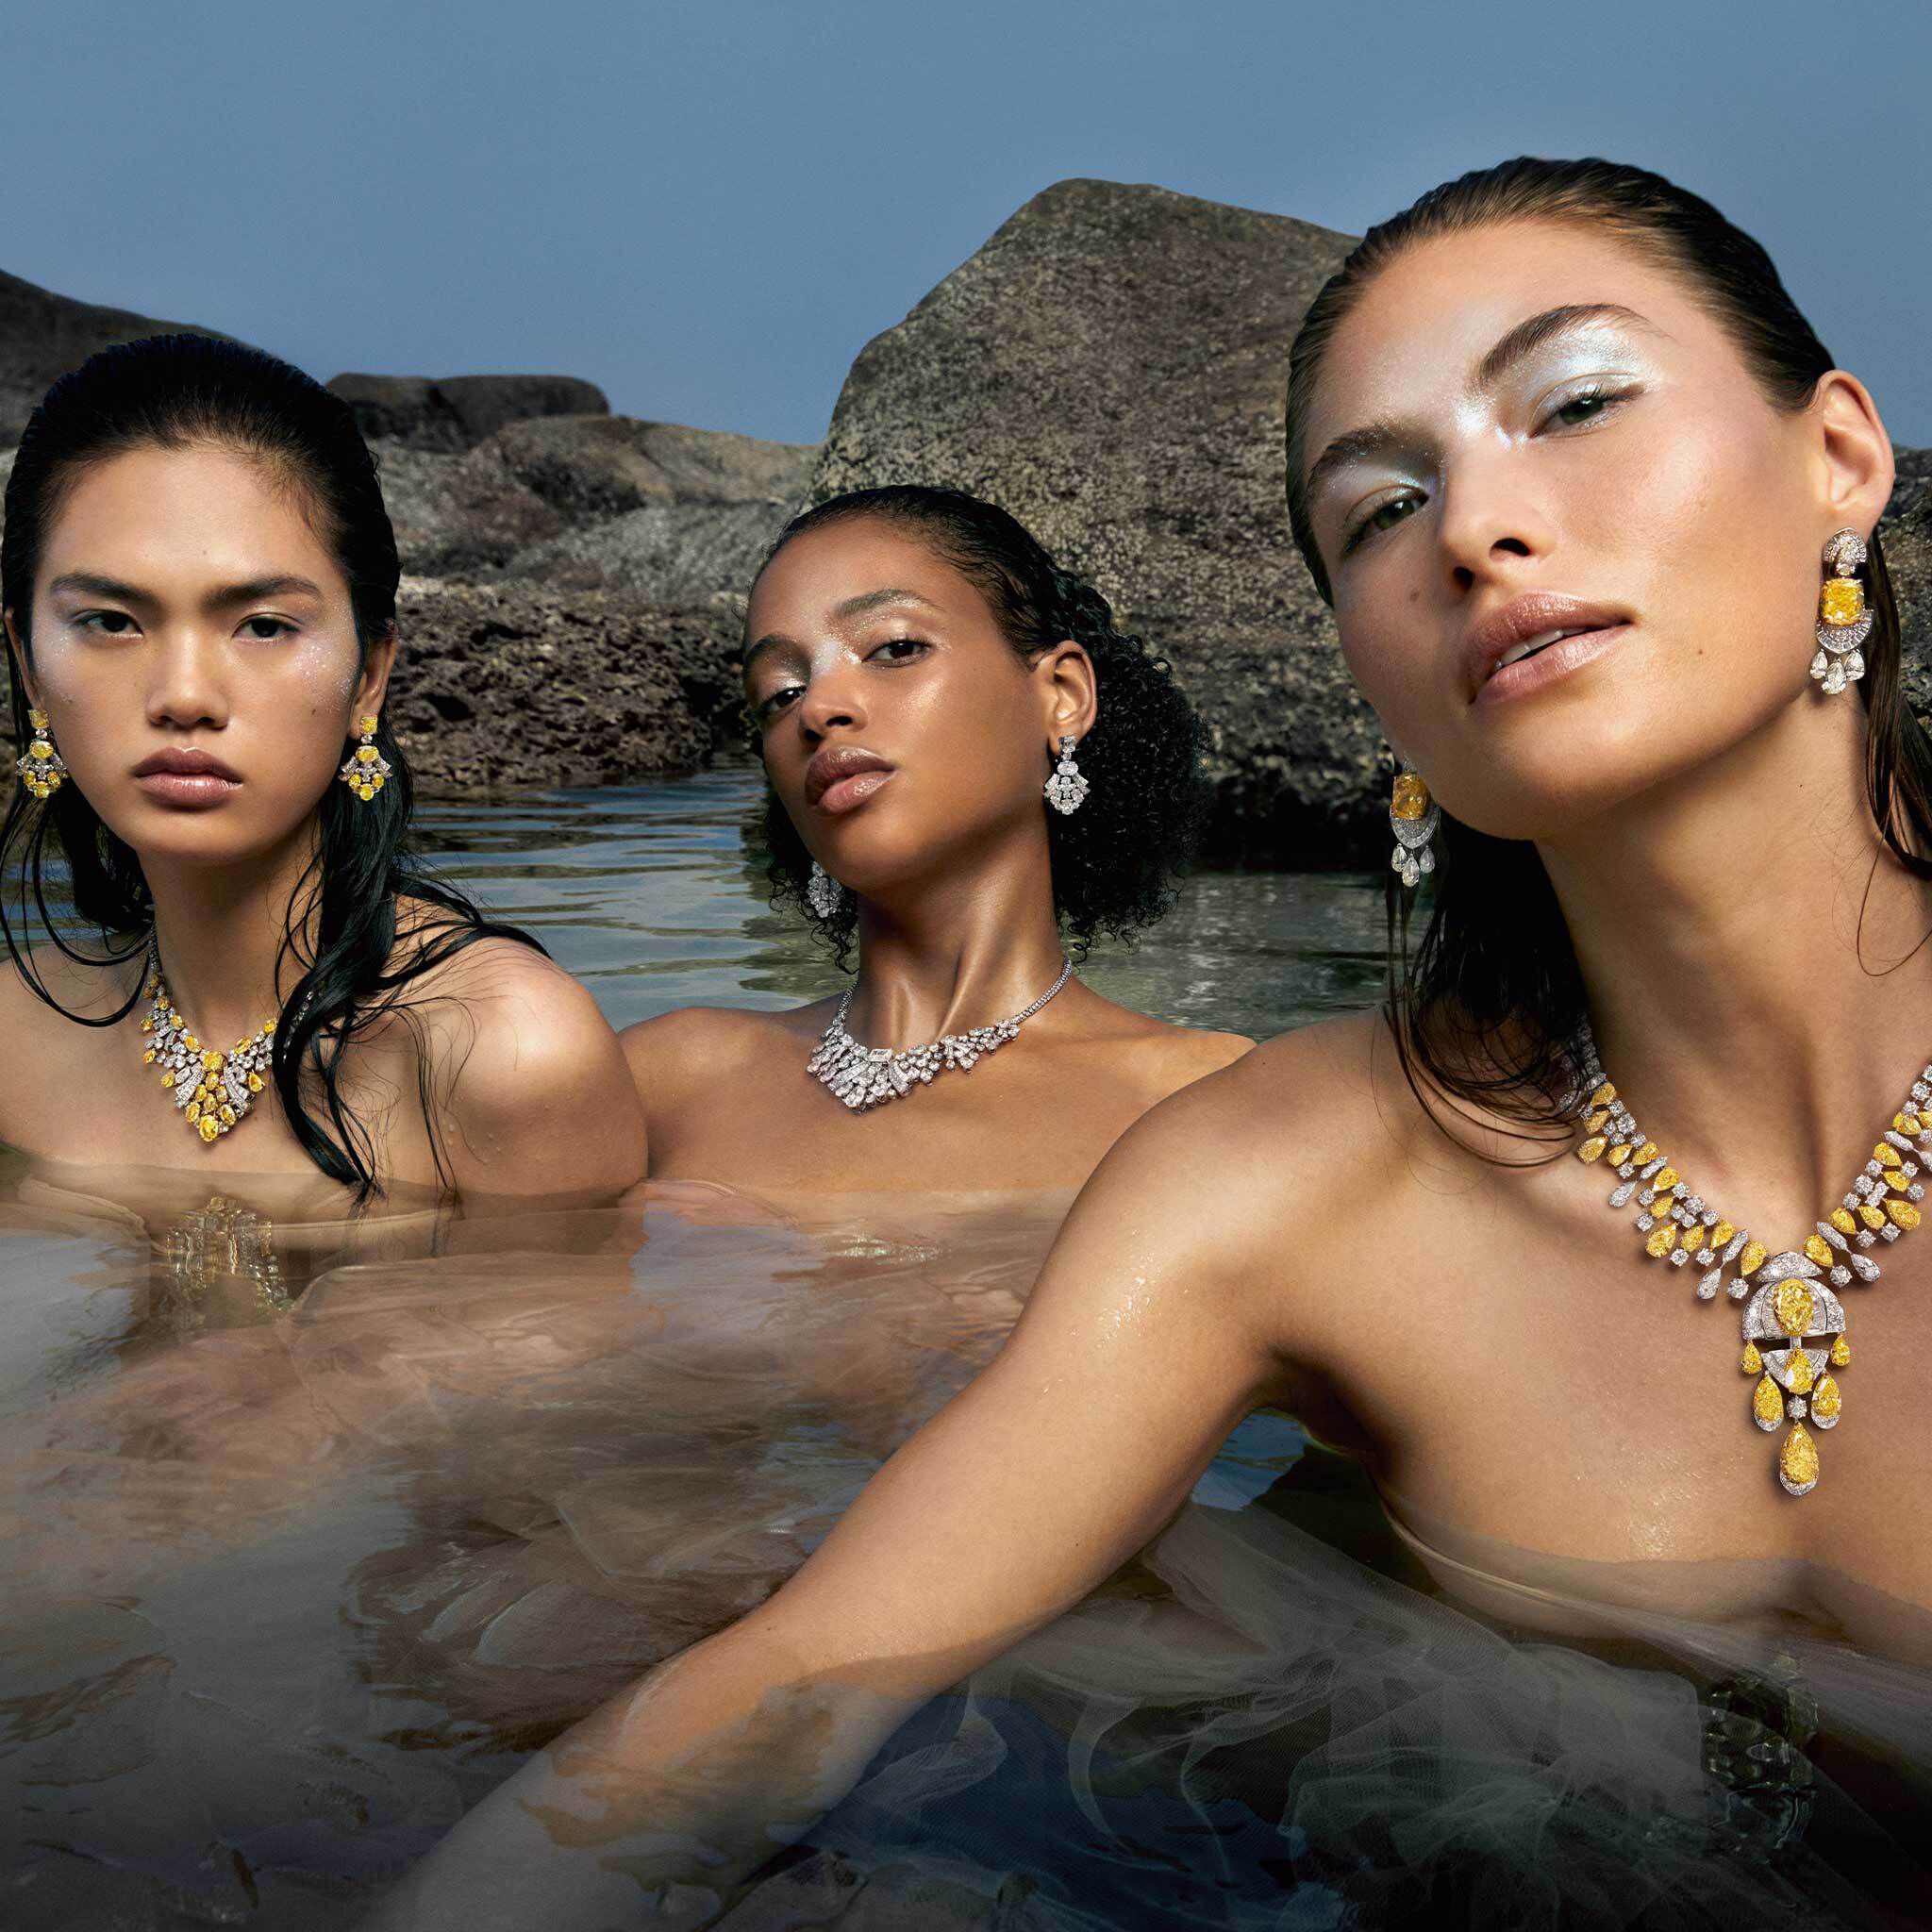 Video of models wearing Graff high jewellery in the sea